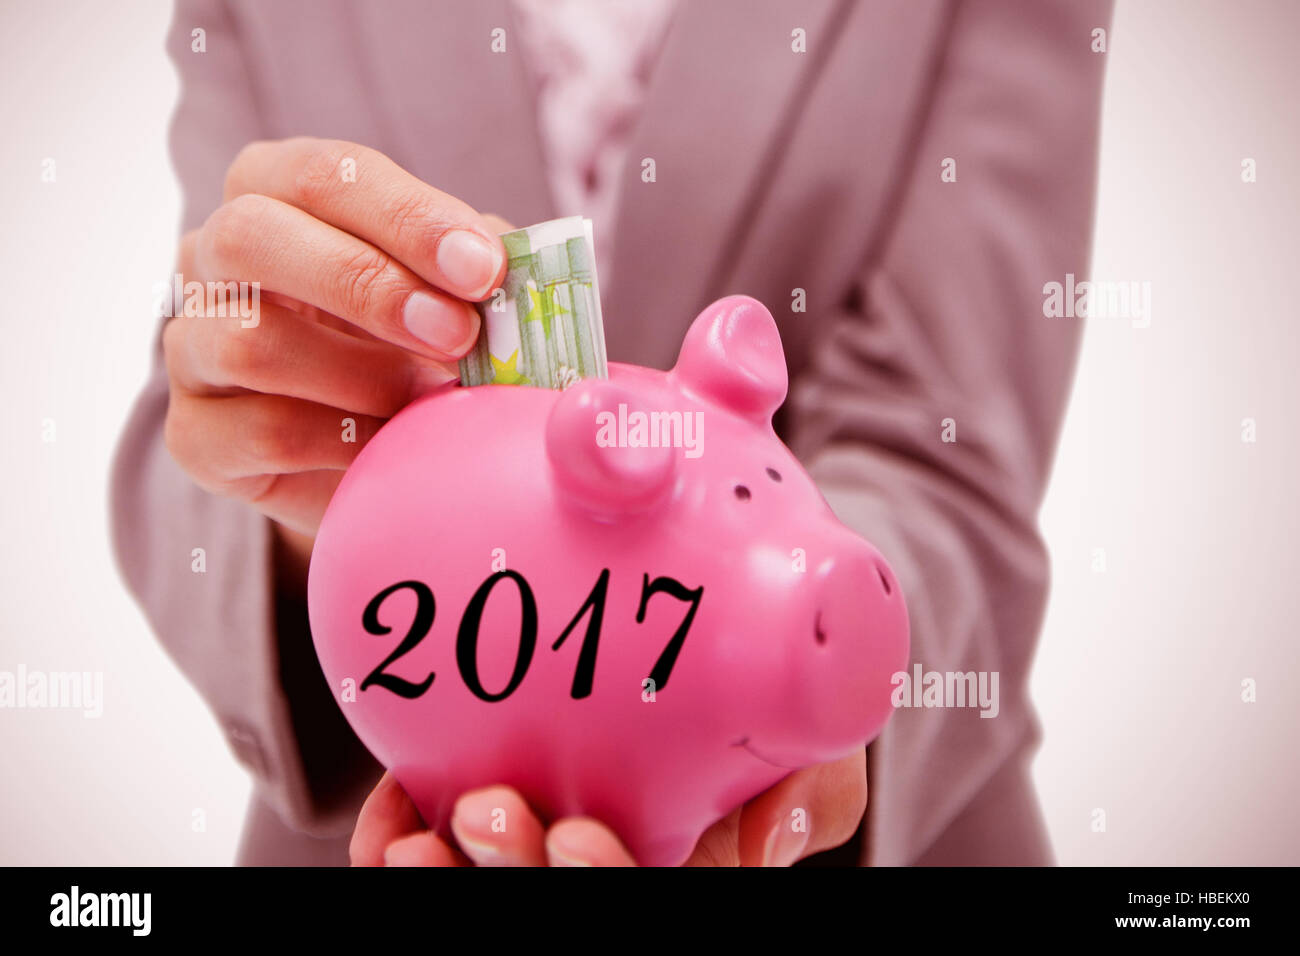 Composite image of money being put into piggy bank by smiling businesswoman Stock Photo